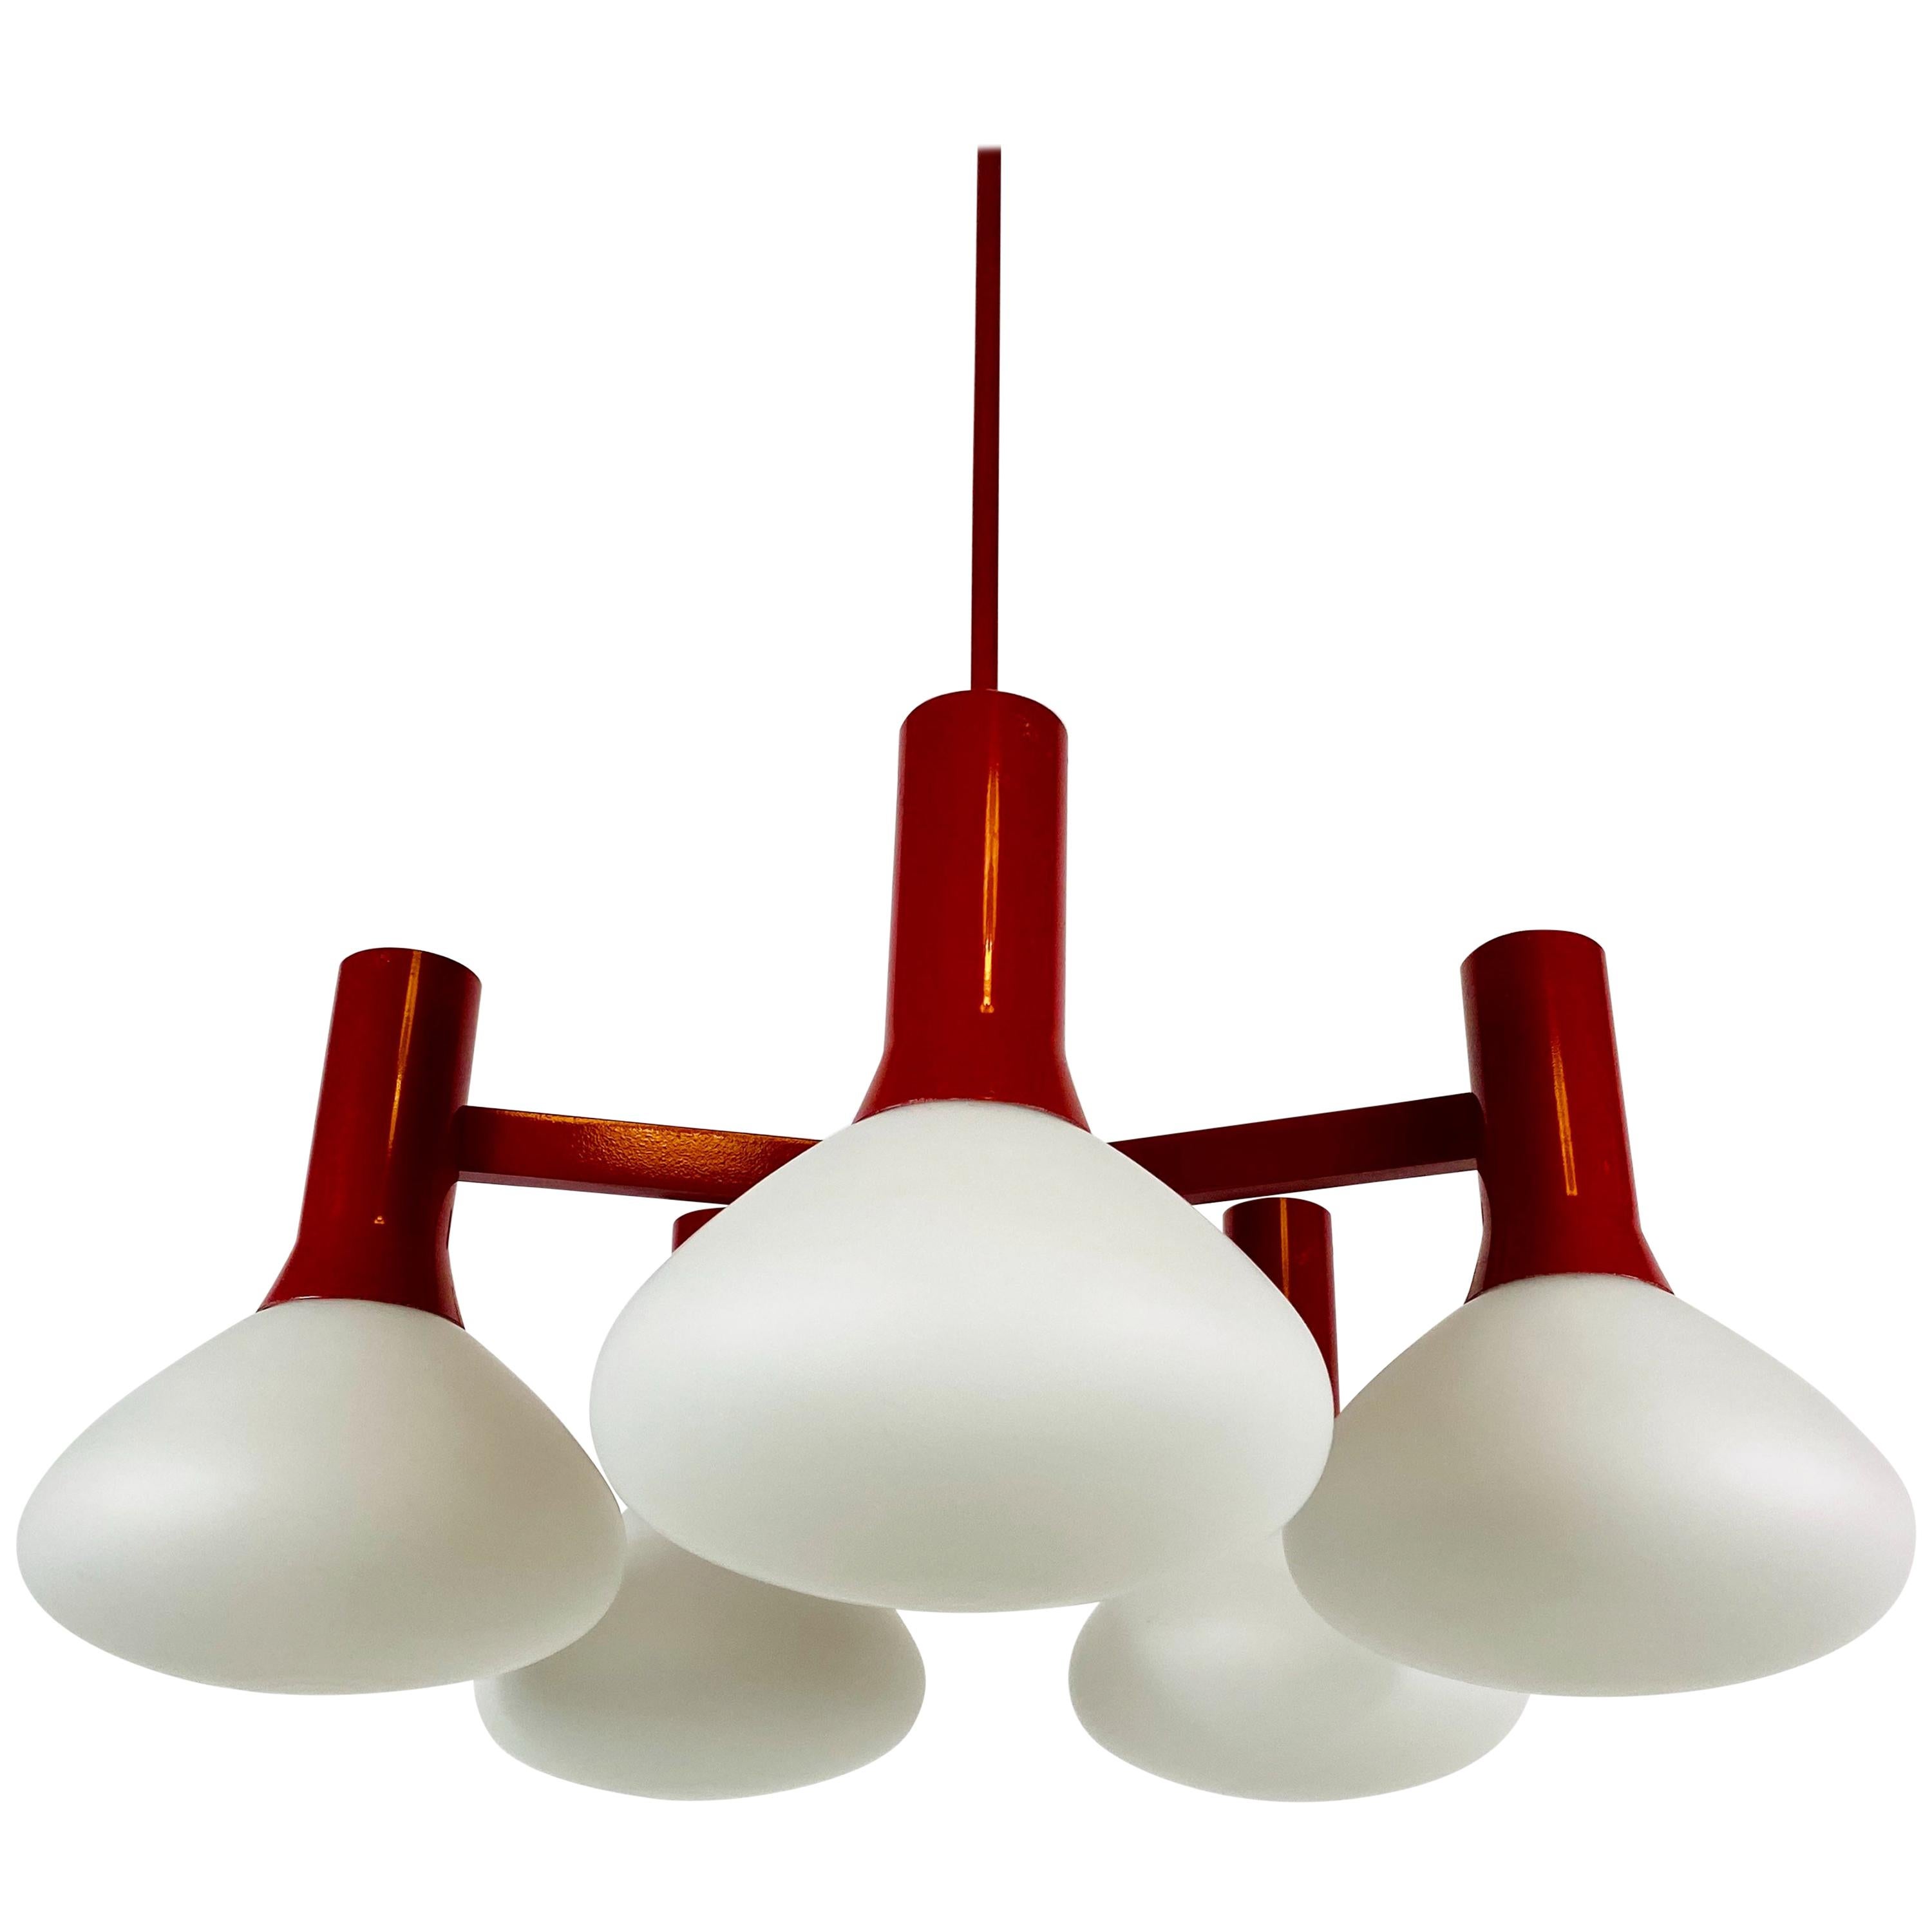 Rare Kaiser Midcentury Red 5-Arm Space Age Chandelier, 1960s, Germany